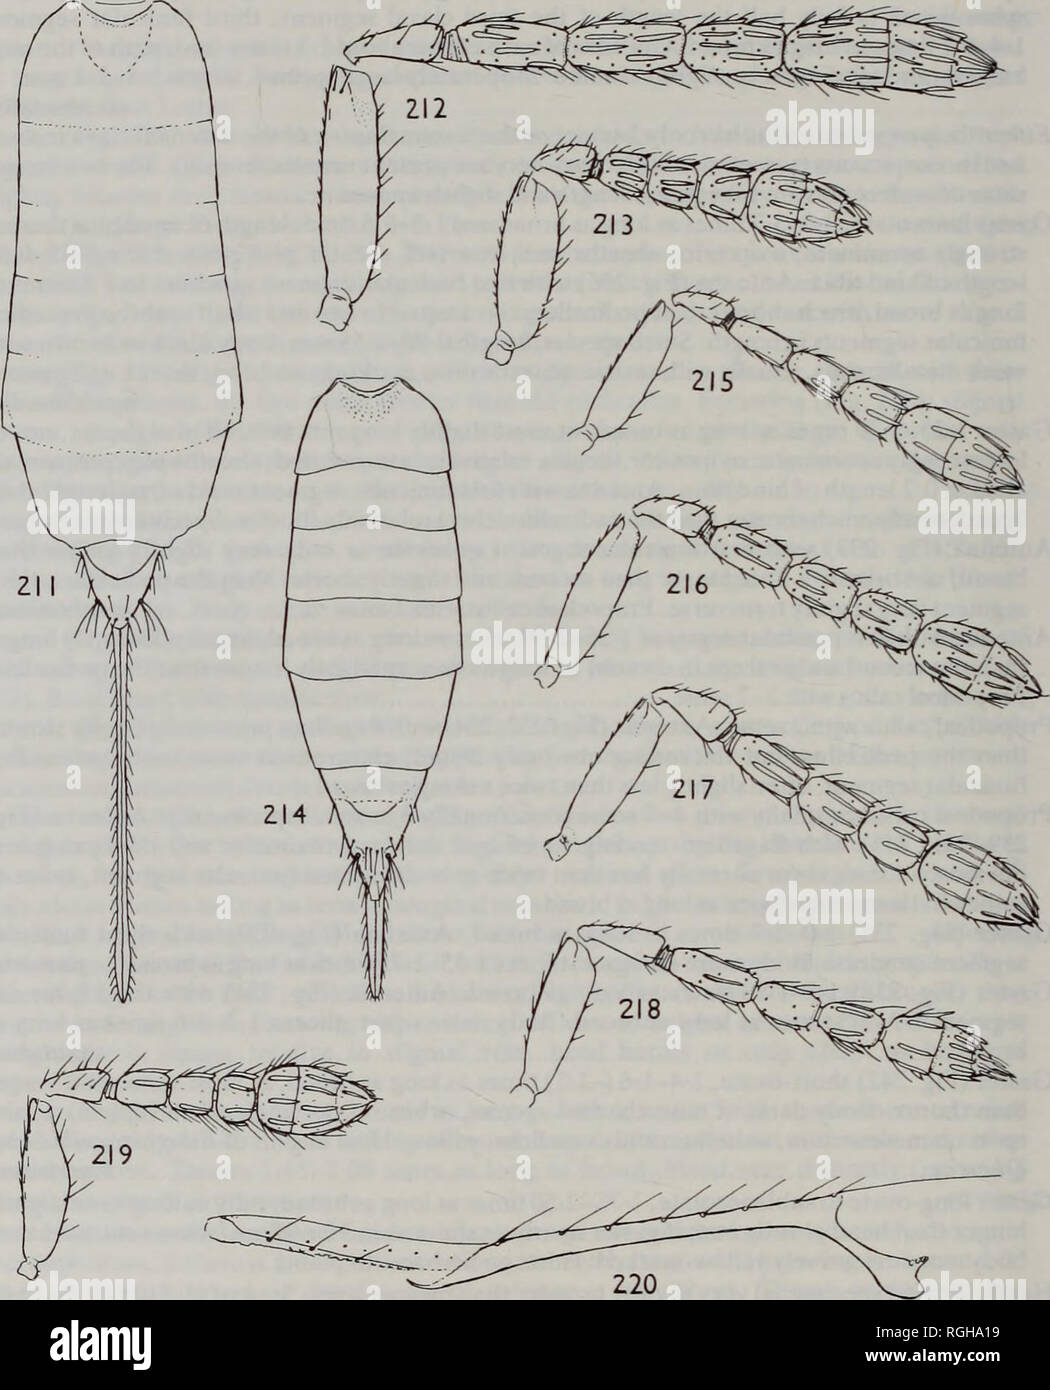 . Bulletin of the British Museum (Natural History) Entomology. 140 M. W. R. DE V. GRAHAM. Figs 211-220 211, 212, Aprostocetus (Aprostocetus) bucculentus (Kostjukov), 9: (211) gaster; (212) antenna. 213, A. (A.) malagensis sp. n. $, antenna. 214, 215, A. (A.) larzacensis sp. n. $; (214) gaster; (215) antenna. 216, A. (A.) aartsenisp. n. $, antenna. 217 A. (A.) levadiensis sp. n. $, antenna. 218, A. (A.)crassicepssp. n. $,antenna. 219,220, A (A)toxisp.n. $: (219)antenna; (220)forewing, anterior.. Please note that these images are extracted from scanned page images that may have been digitally en Stock Photo